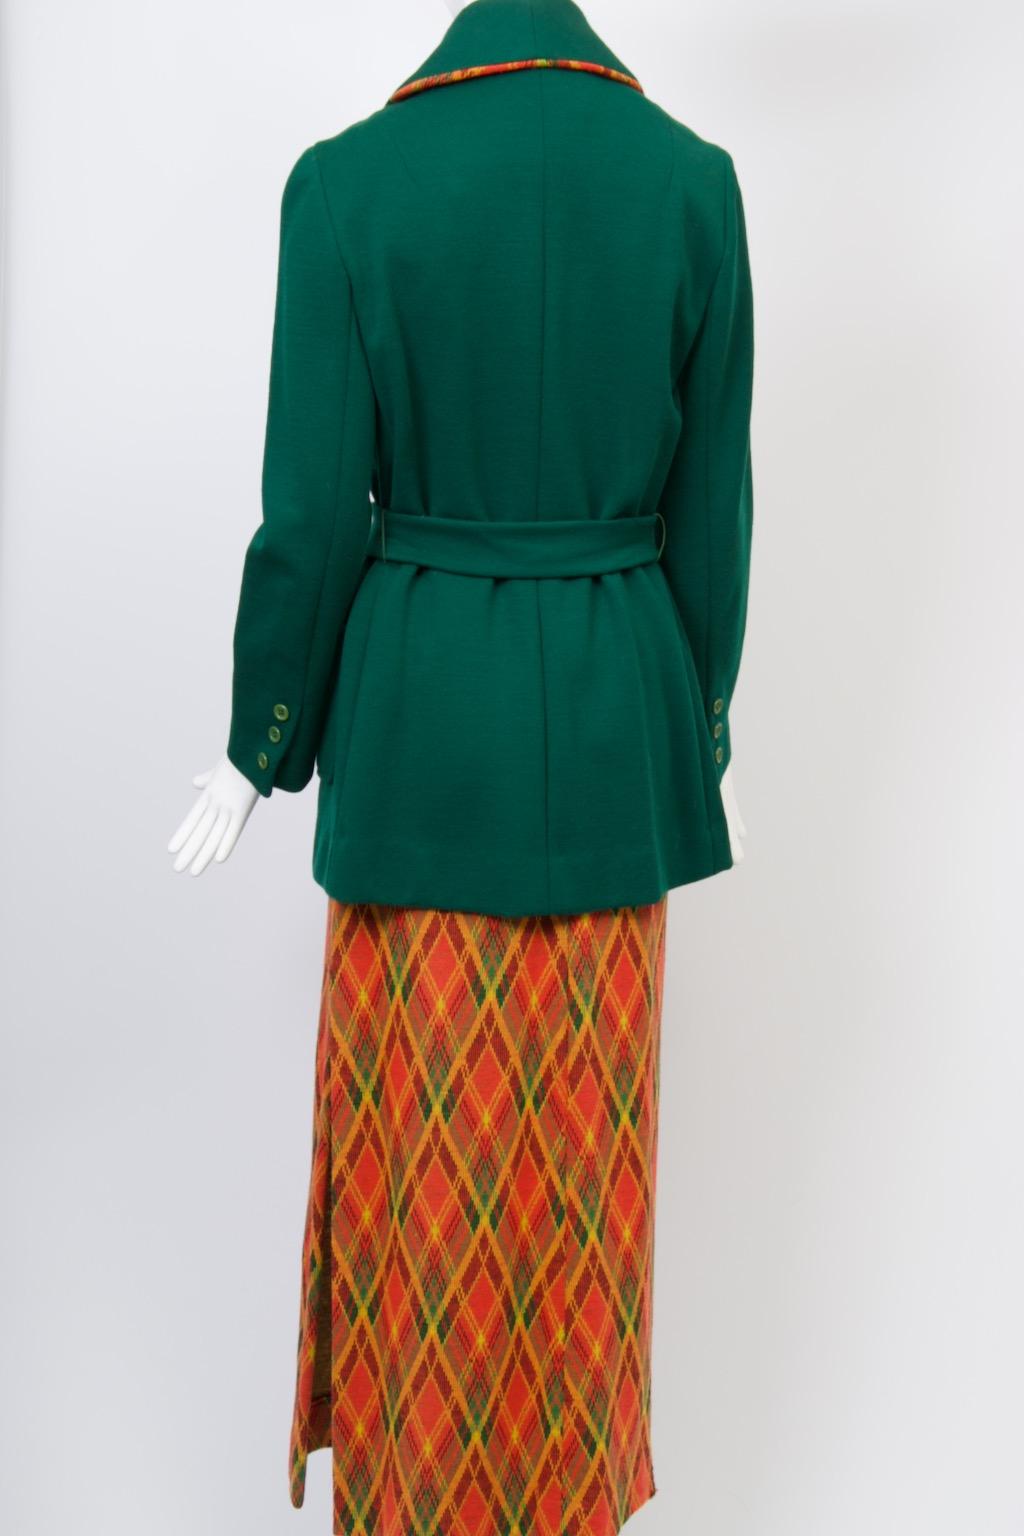 Brenner Couture Plaid Maxi Dress with Green Jacket In Excellent Condition For Sale In Alford, MA